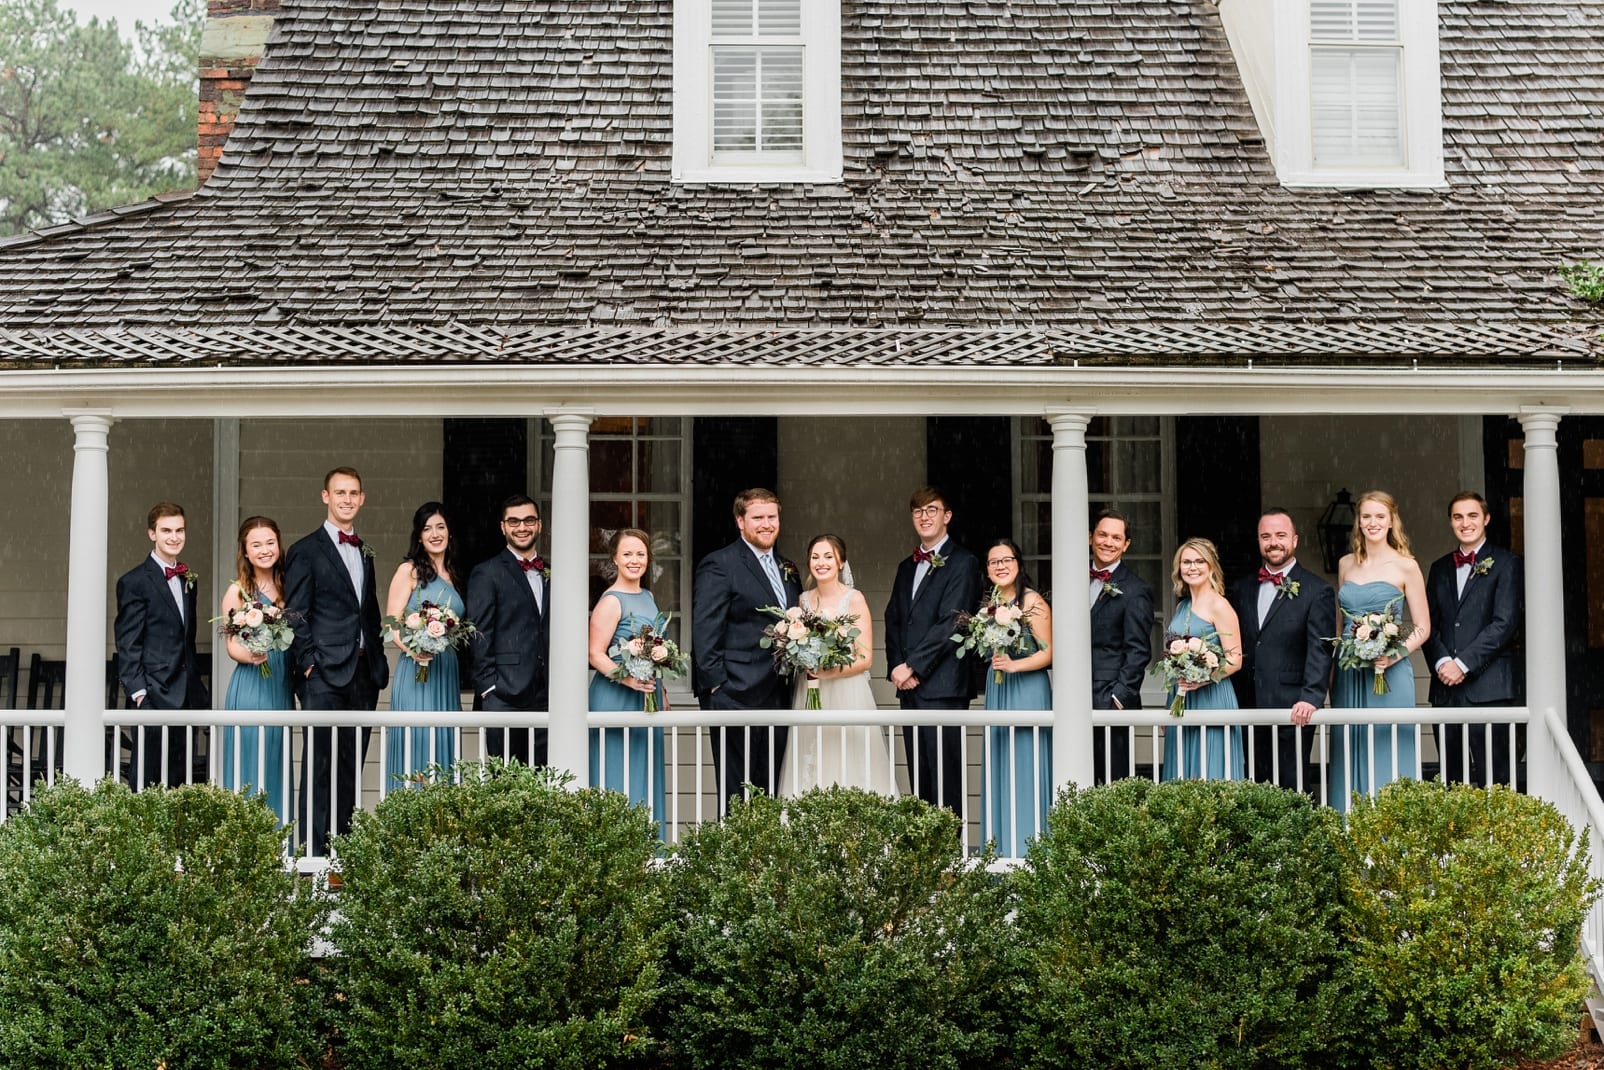 Sutherland Estate wedding party with the bride and groom standing across the covered front porch photo